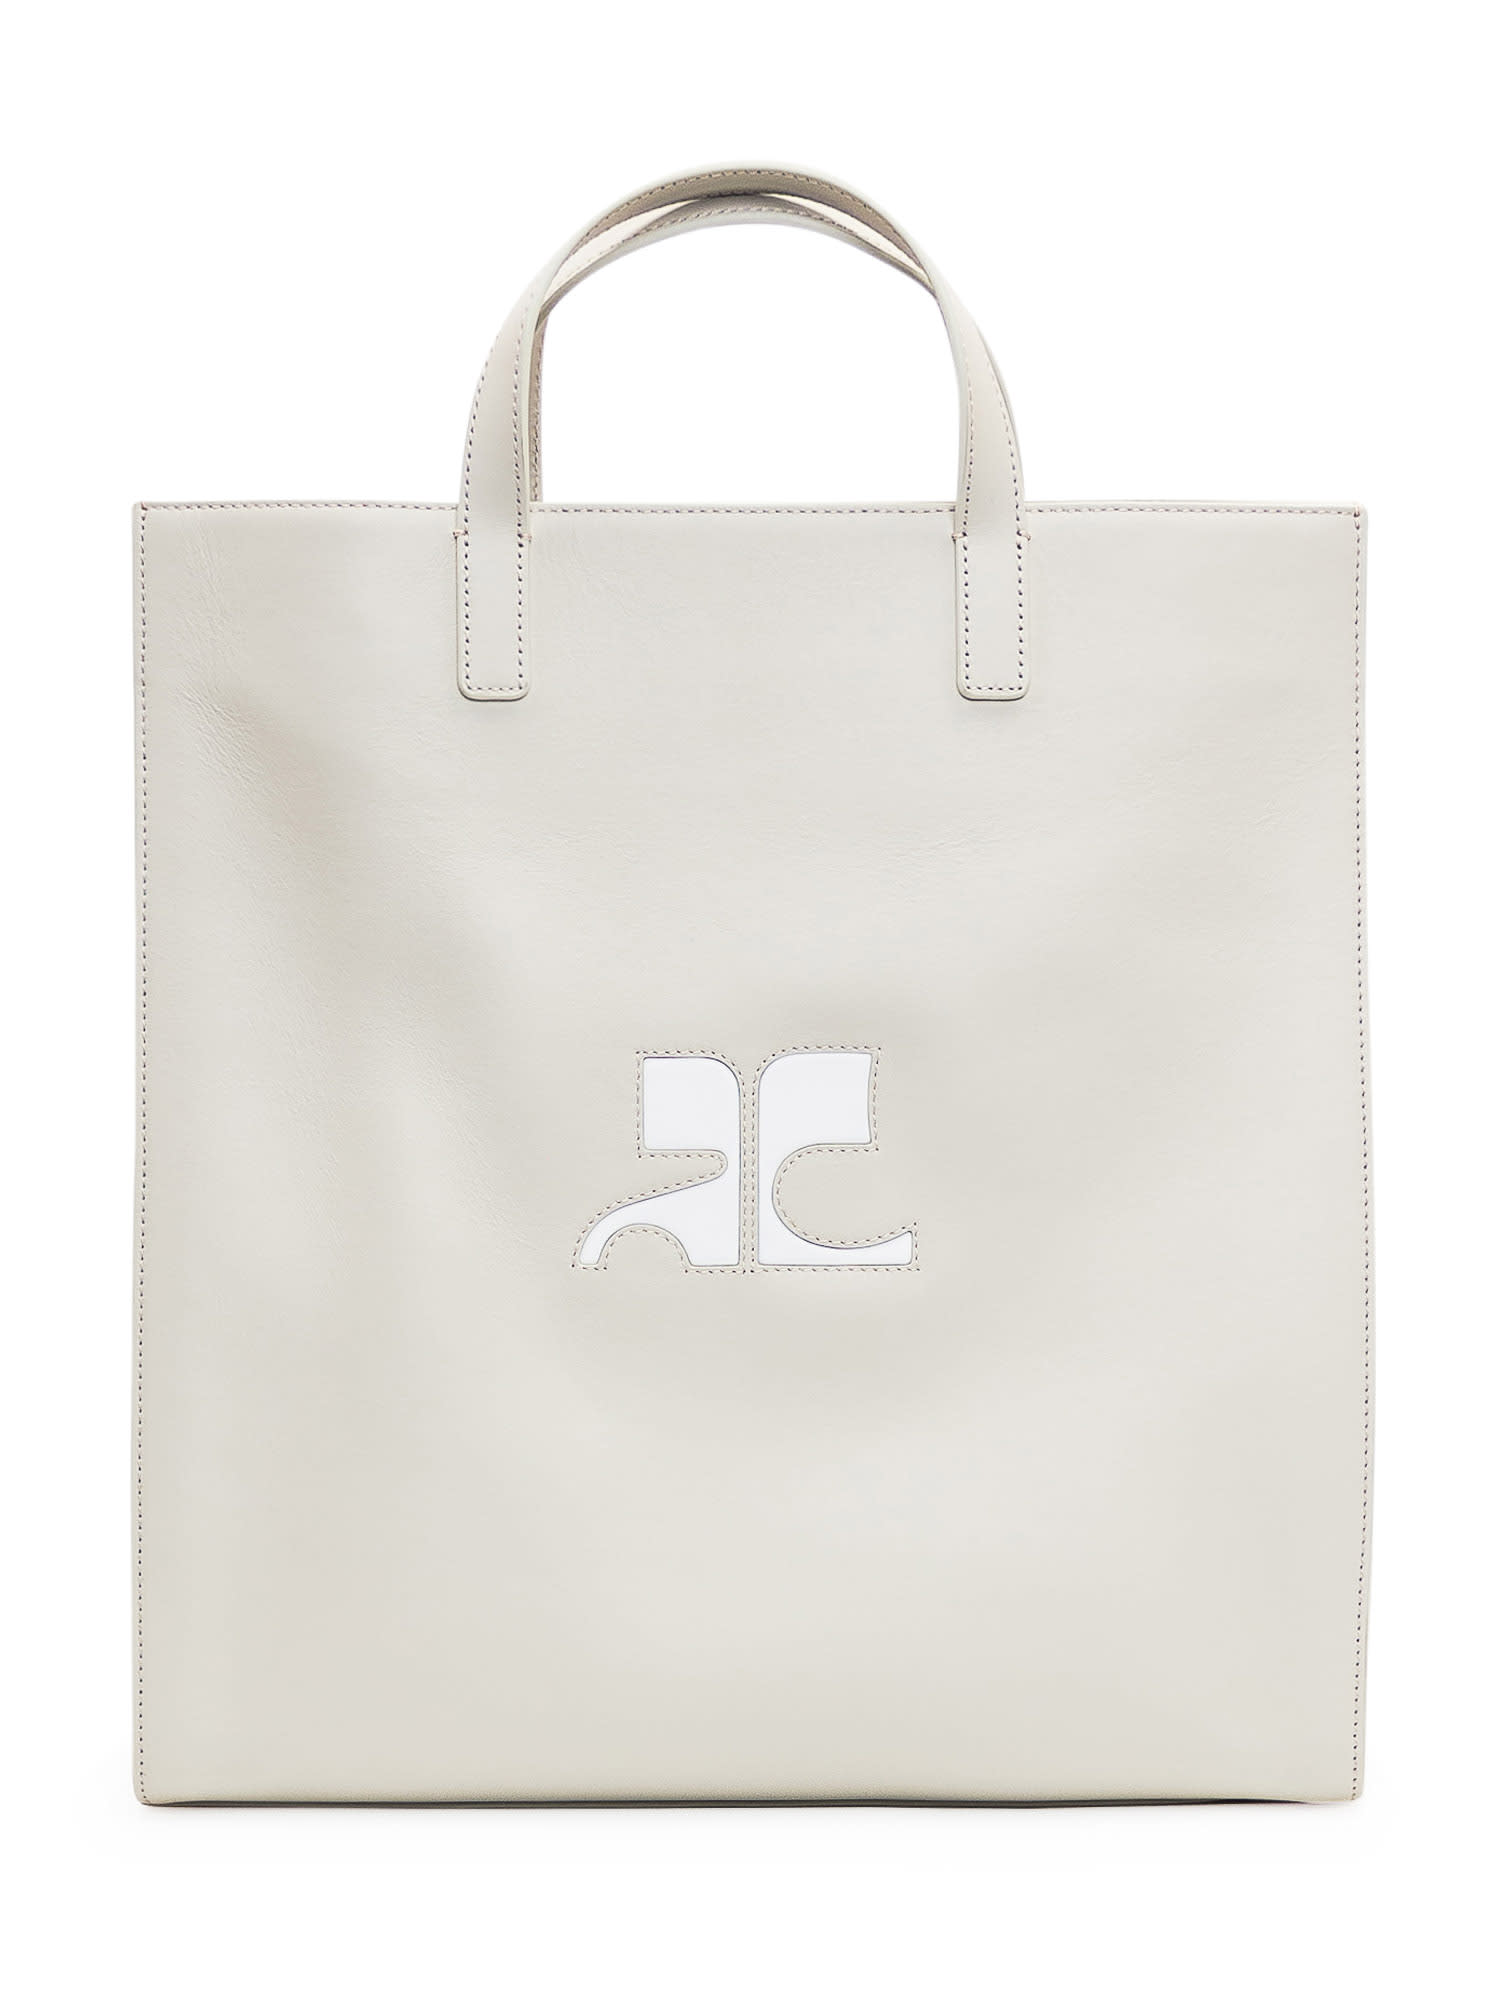 Courrèges Heritage Tote Bag In Mastic Grey